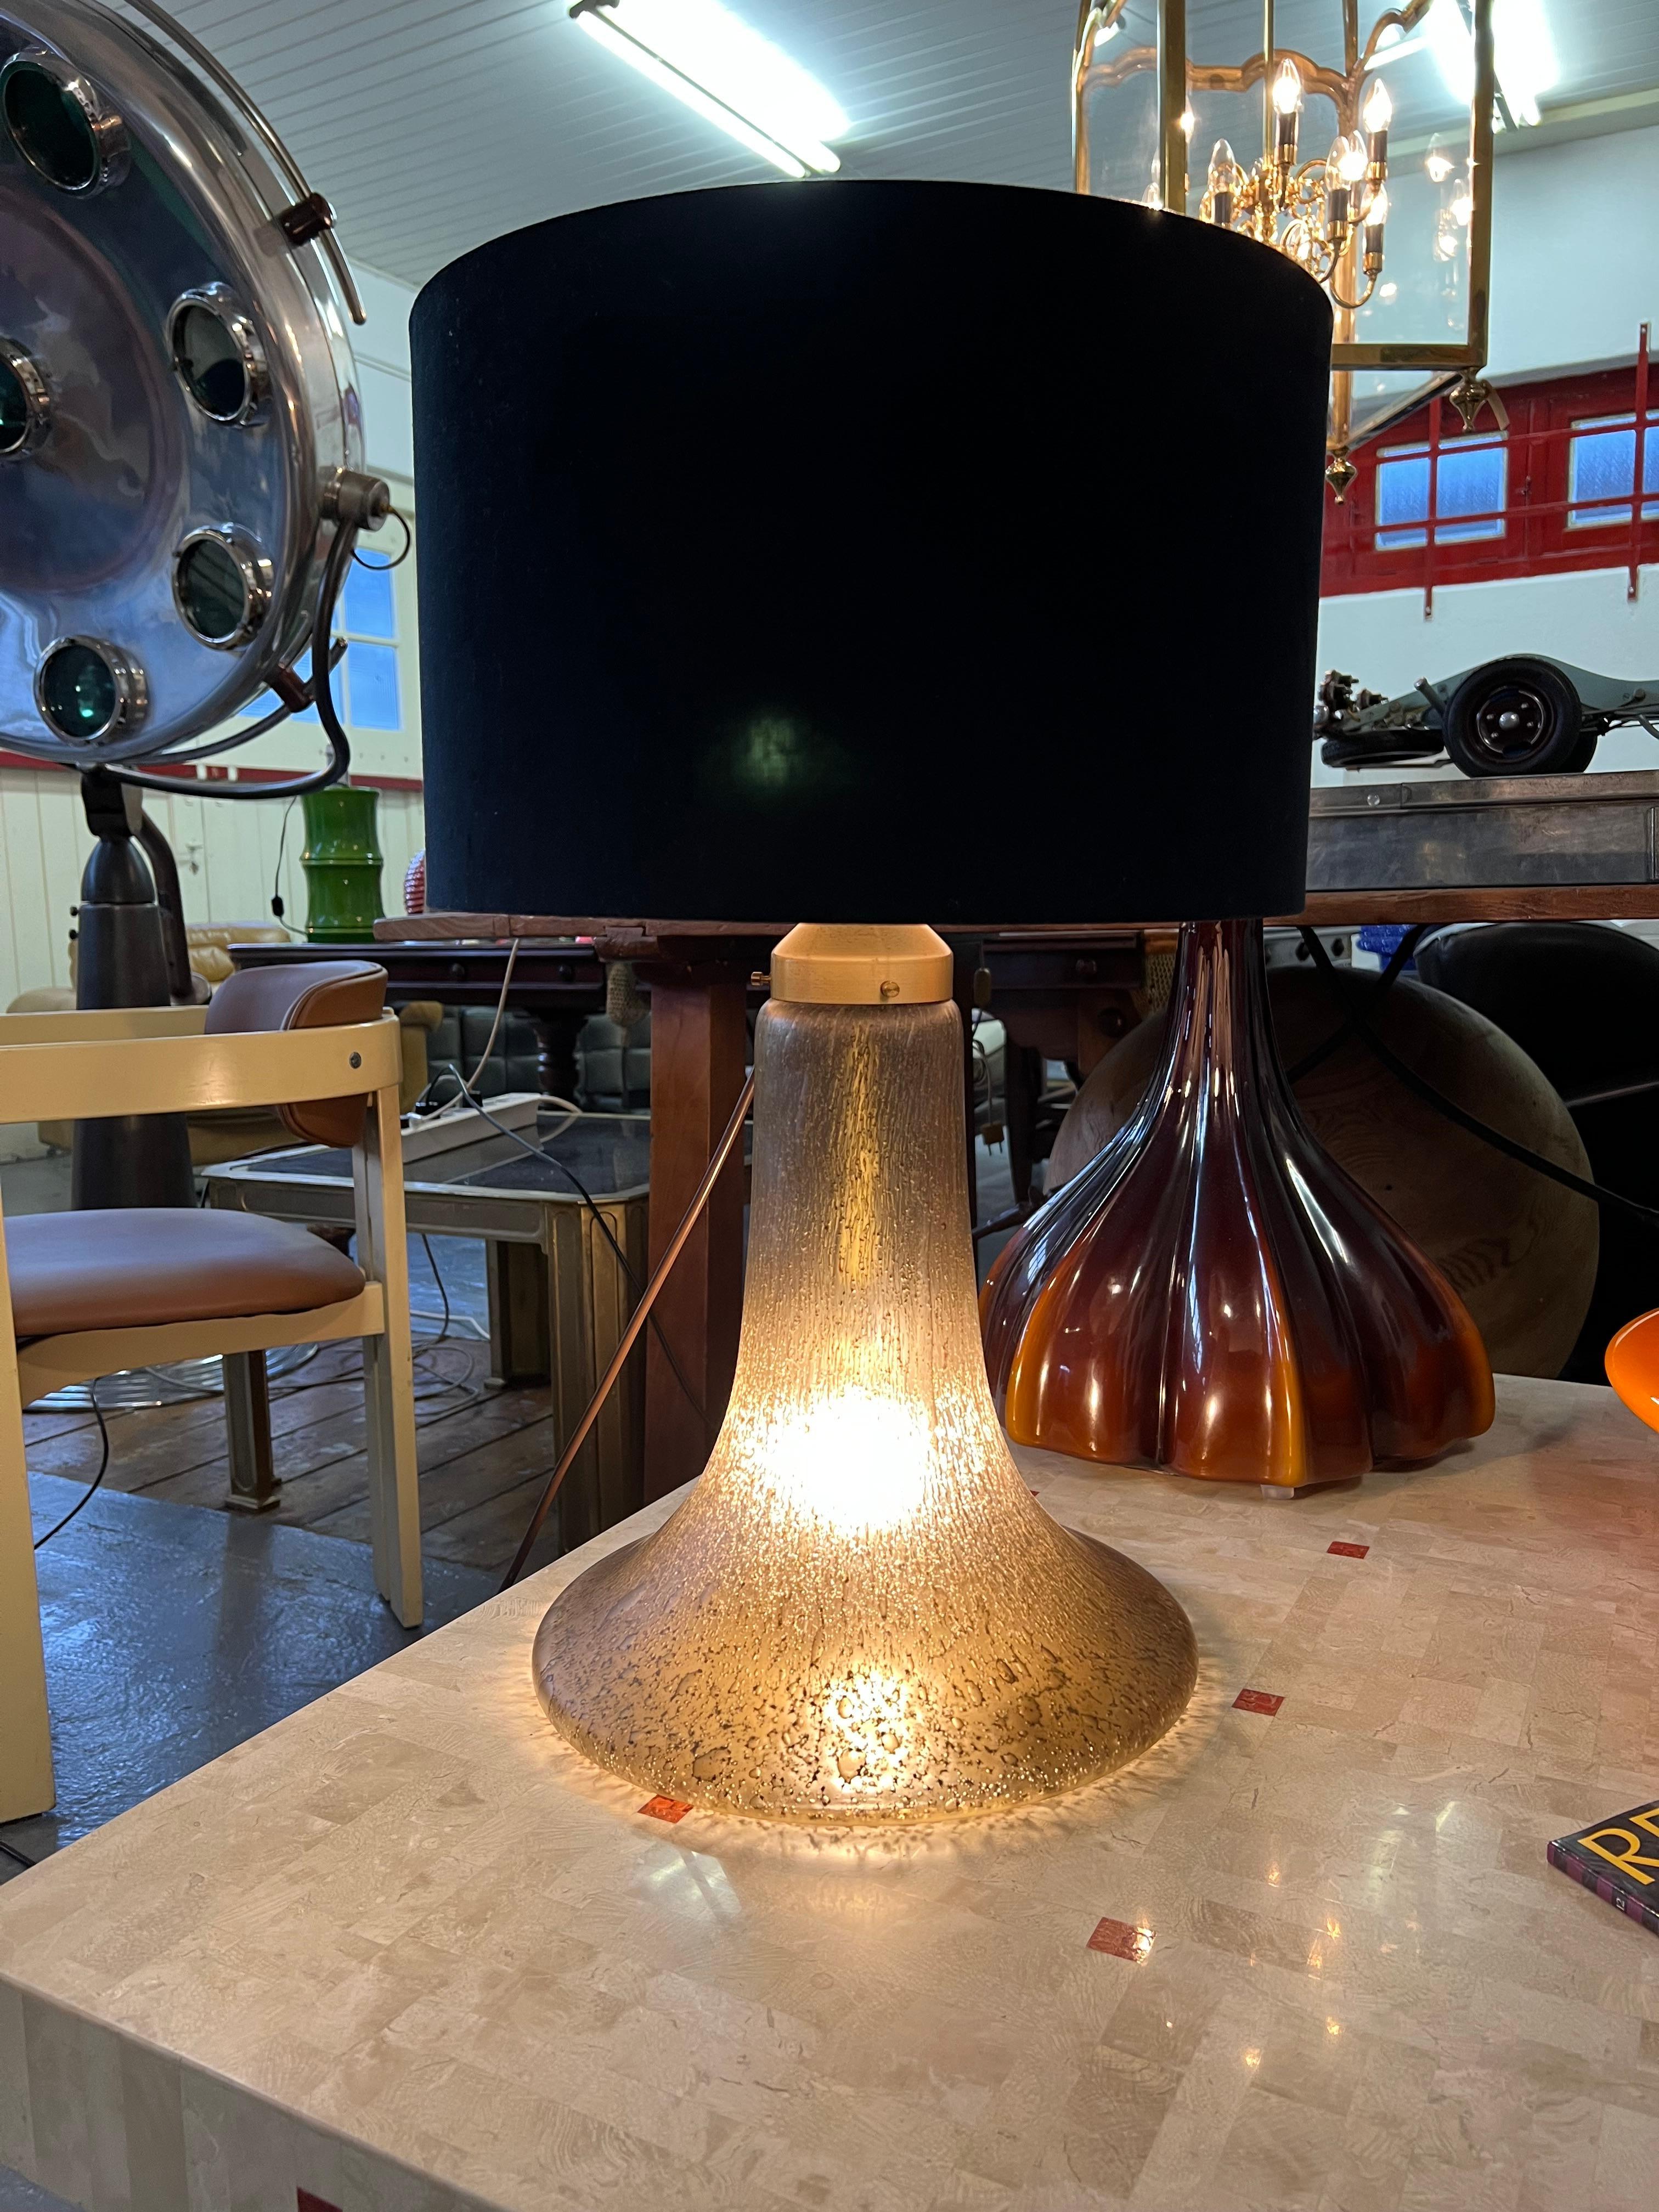 Large Peill & Putzler 1970s Murano Lava glass table lamp.
The item is in excellent condition.
The small air bubbles in the glass create a warm glow of light in your room.
The fact that the base illuminated gives a beatiful warm light.
Will be